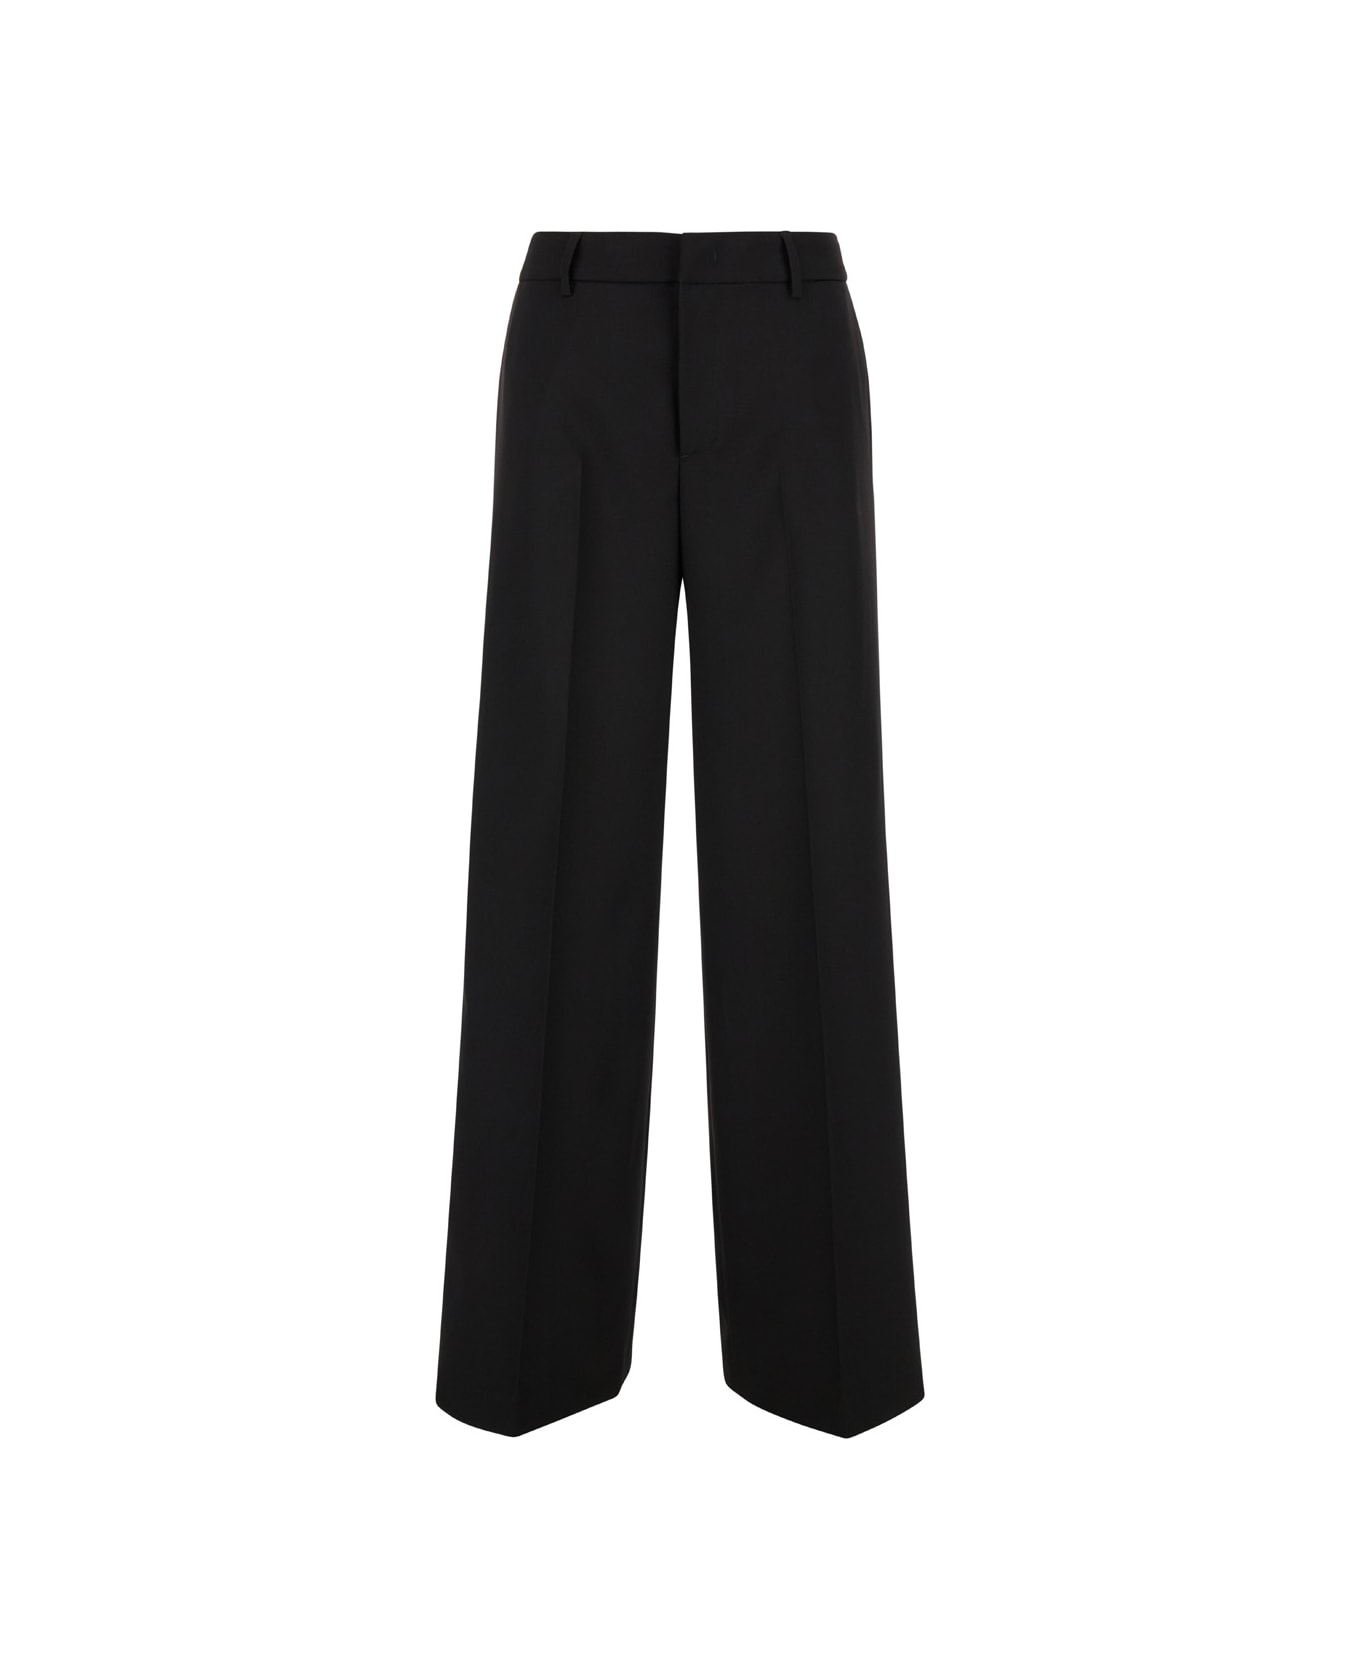 PT Torino Tailored 'lorenza' High Waisted Black Trousers In Technical Fabric Woman - nero